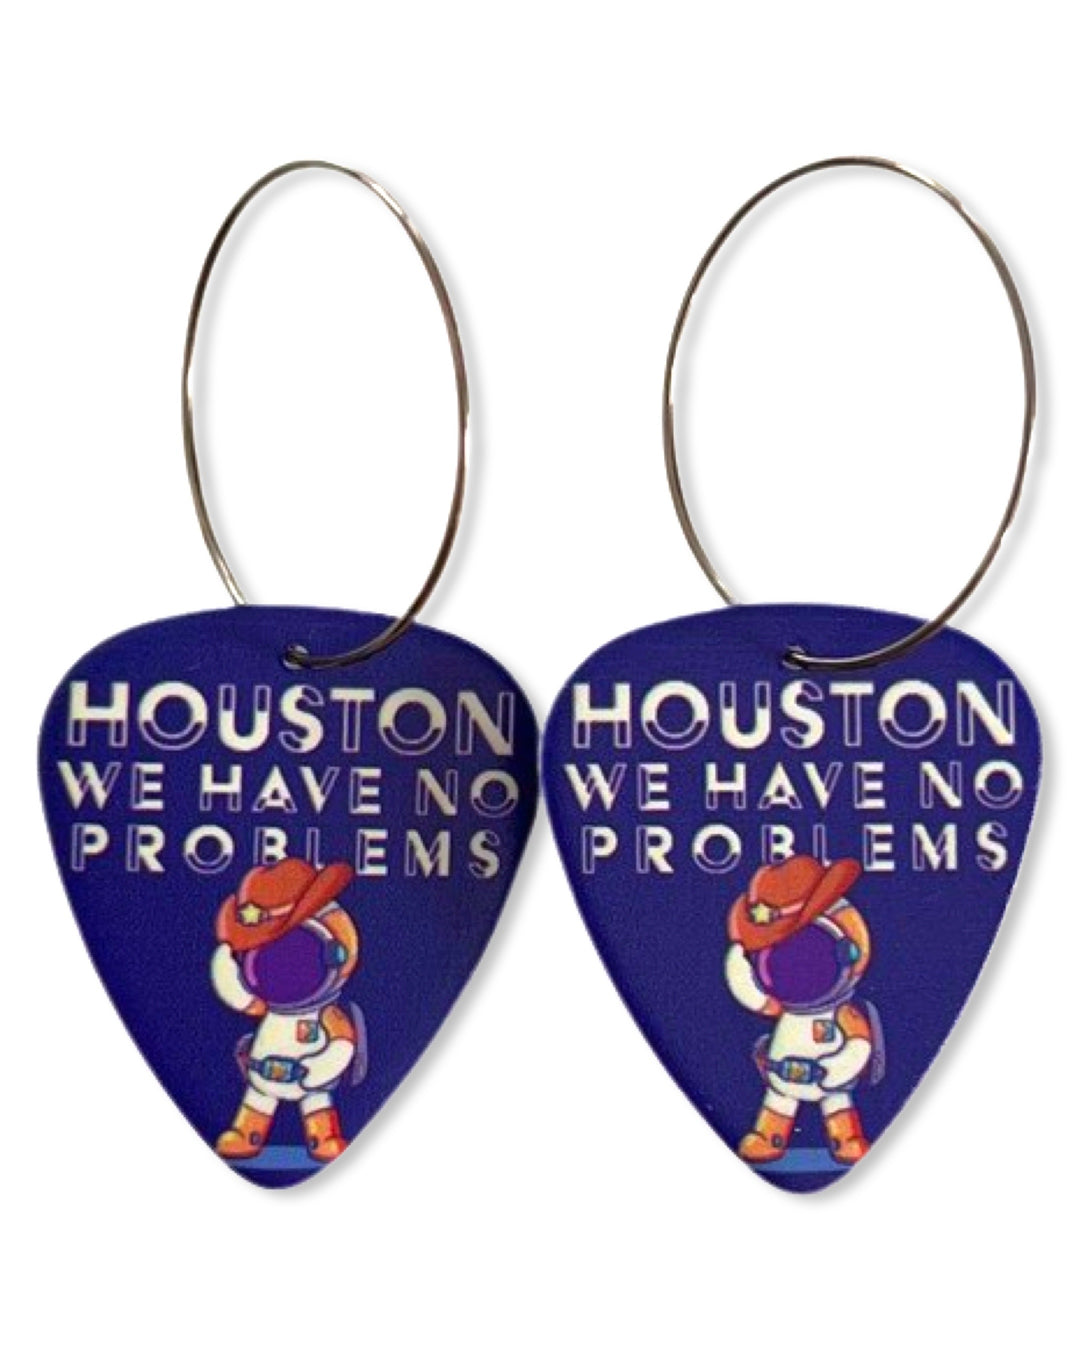 Texas Houston We Have No Problems Reversible Single Guitar Pick Earrings